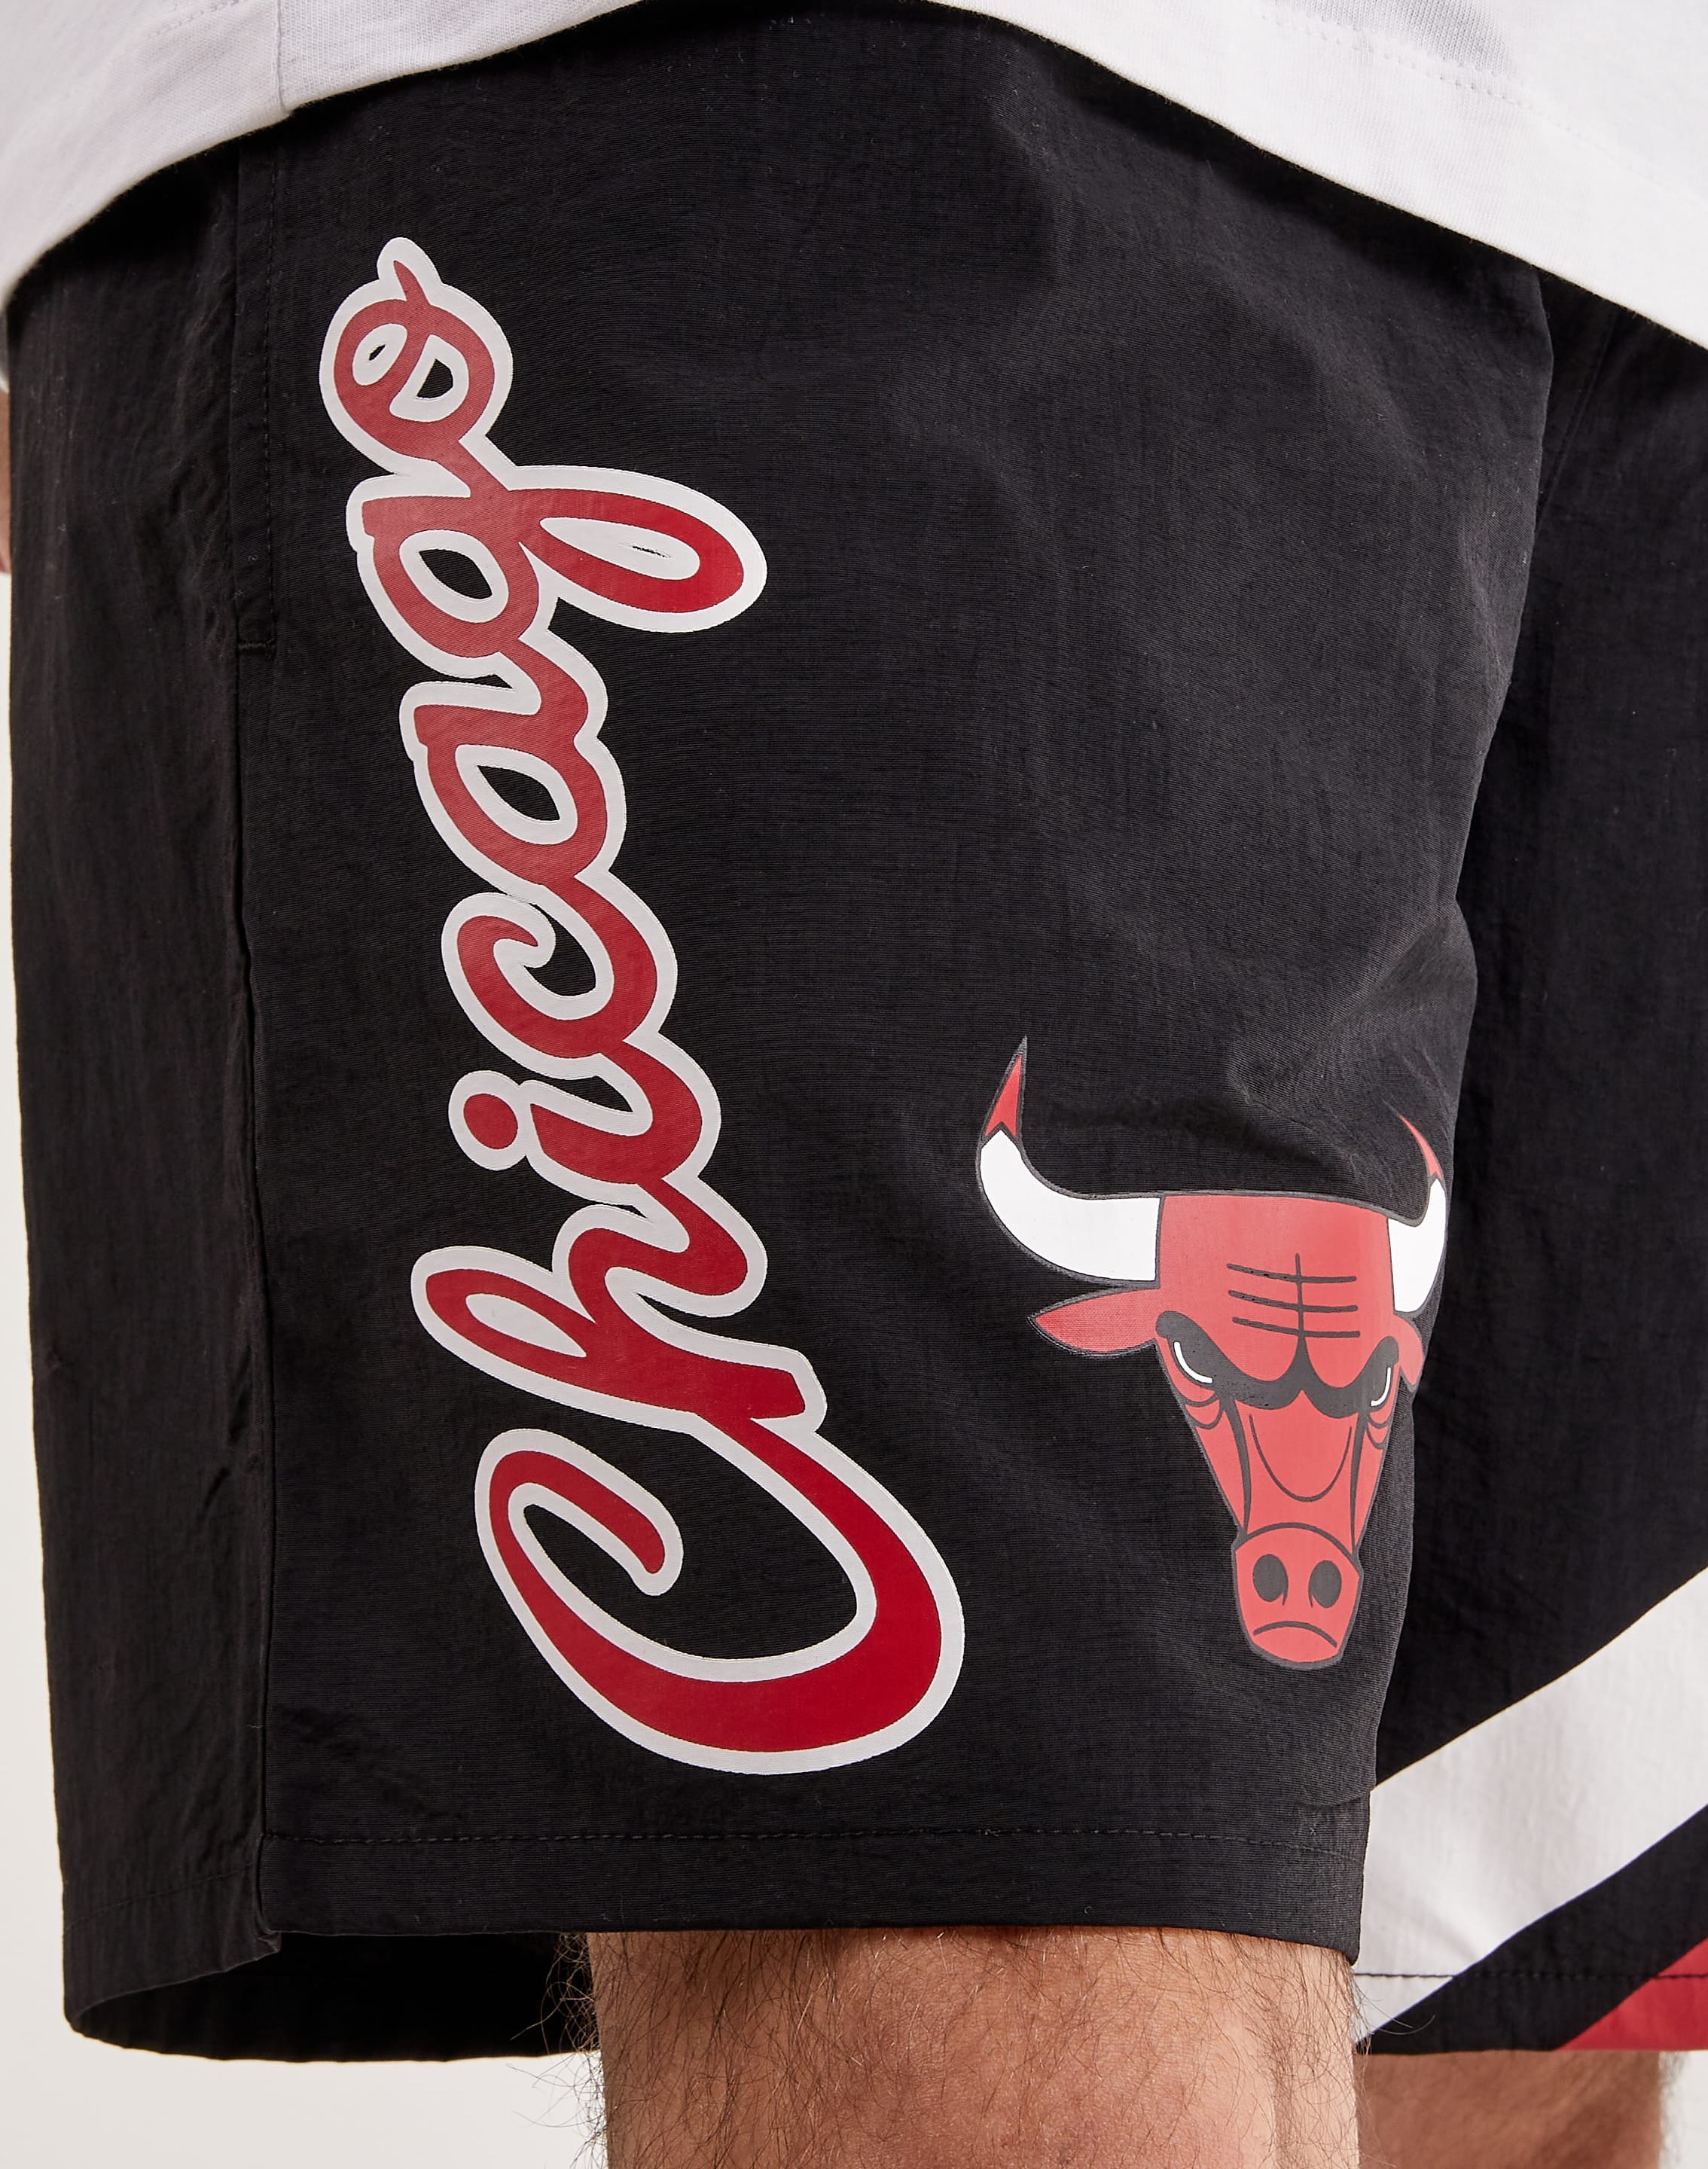 Mitchell & Ness Chicago Bulls Team Heritage Shorts - Red - Large